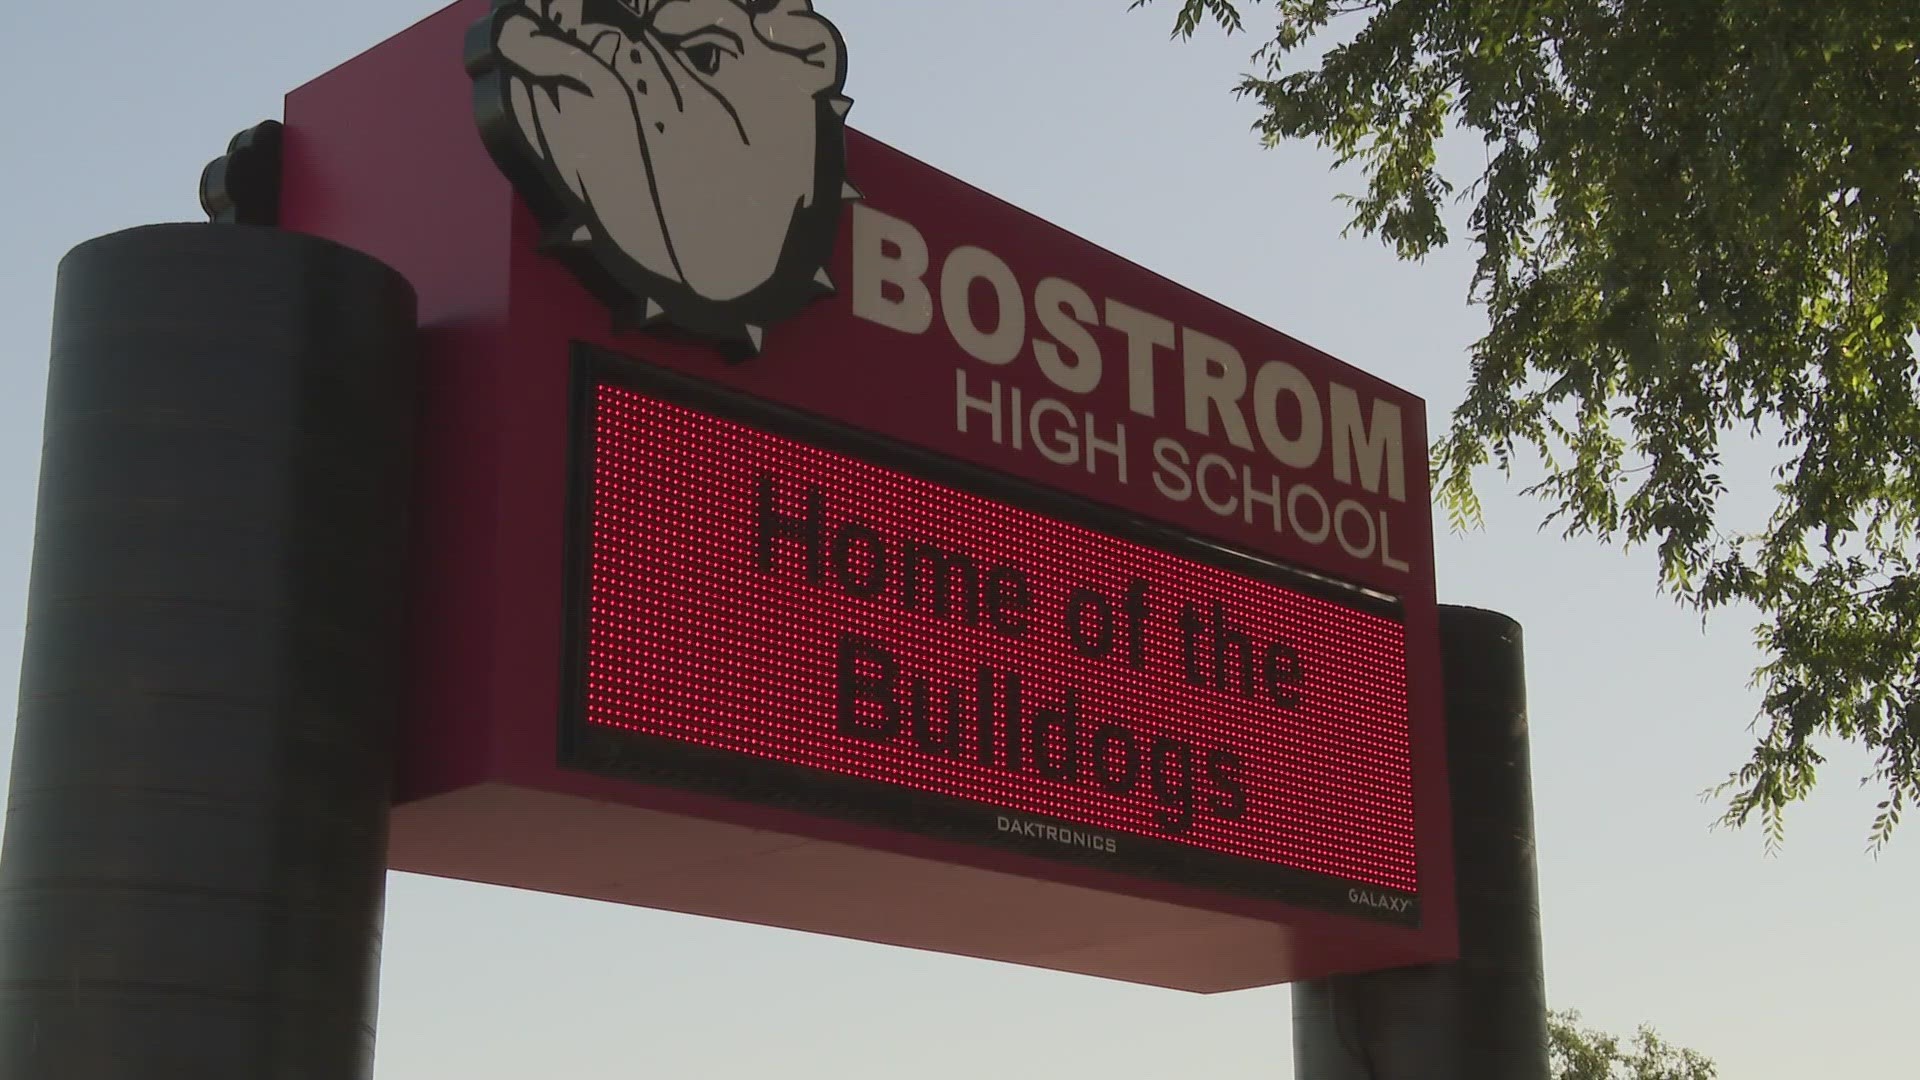 A student was arrested Friday afternoon by Phoenix police for allegedly bringing an AR-15 rifle and ammunition to Bostrom High School.